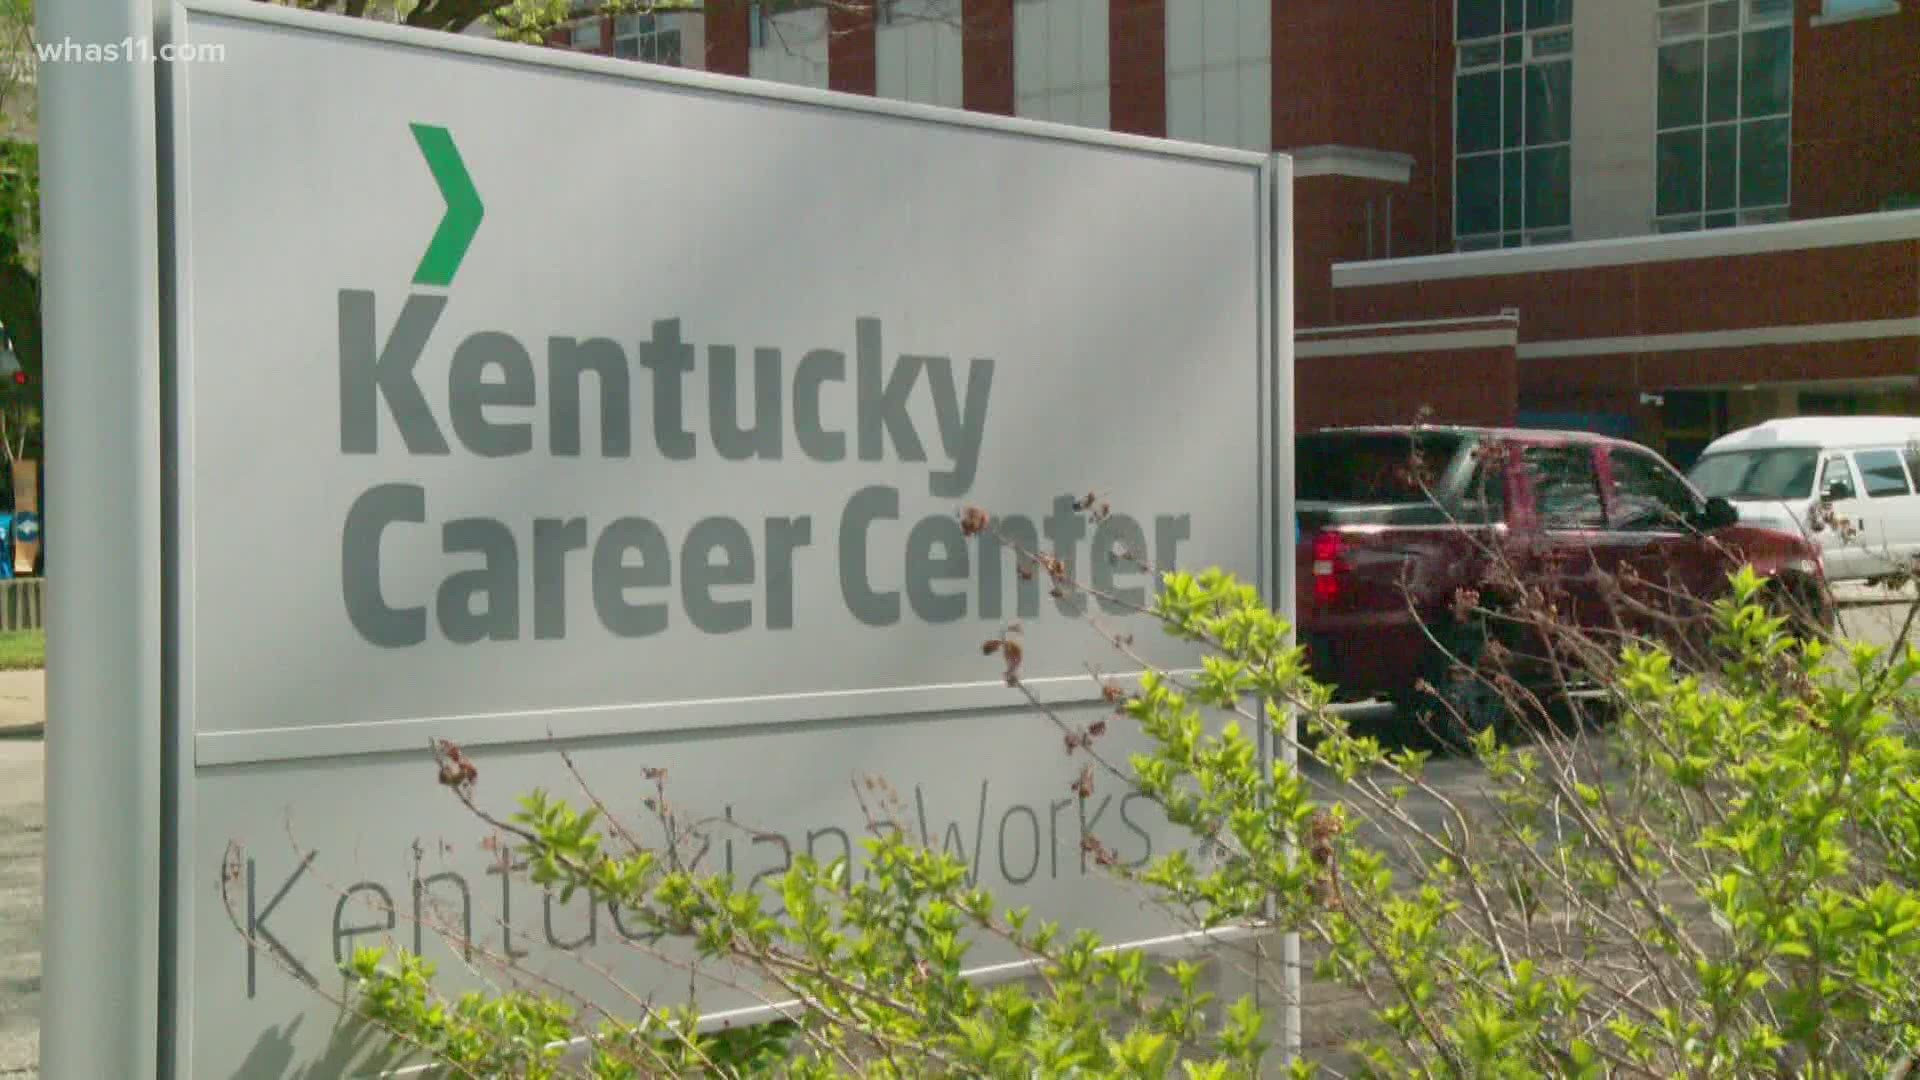 Business growth is coming to Kentuckiana amid staffing issues from hospitality to manufacturing.